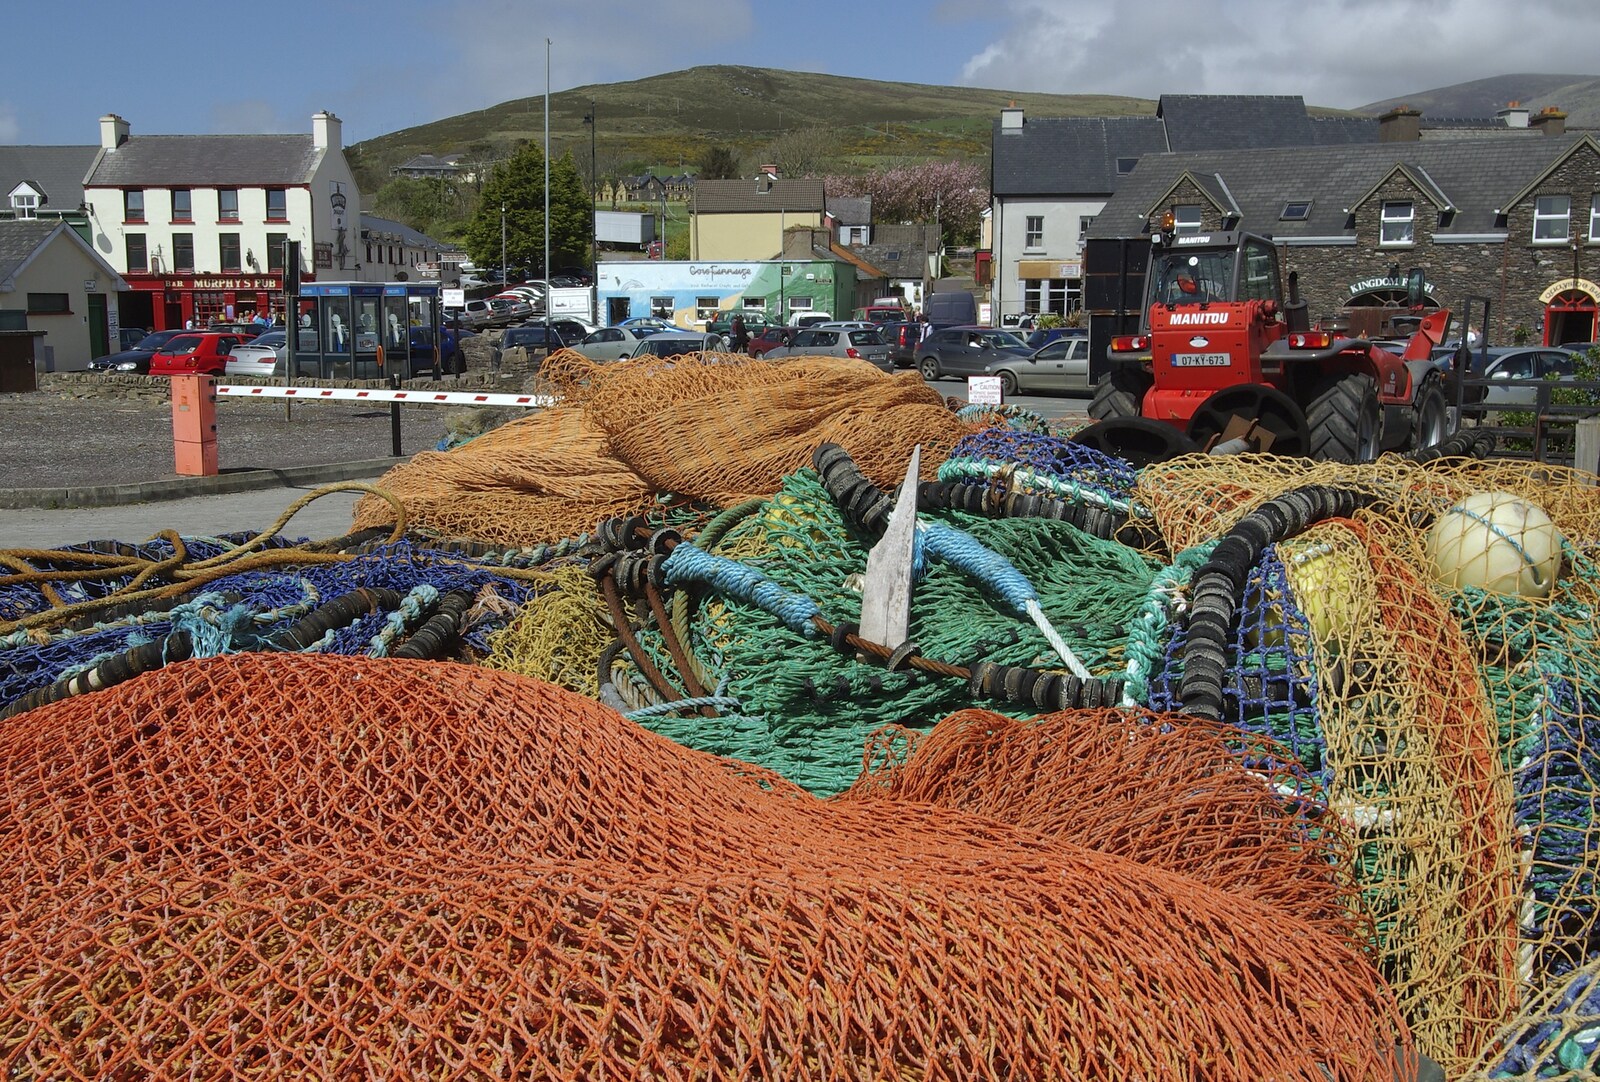 Connor Pass, Slea Head and Dingle, County Kerry, Ireland - 4th May 2008: Multi-coloured fishing nets